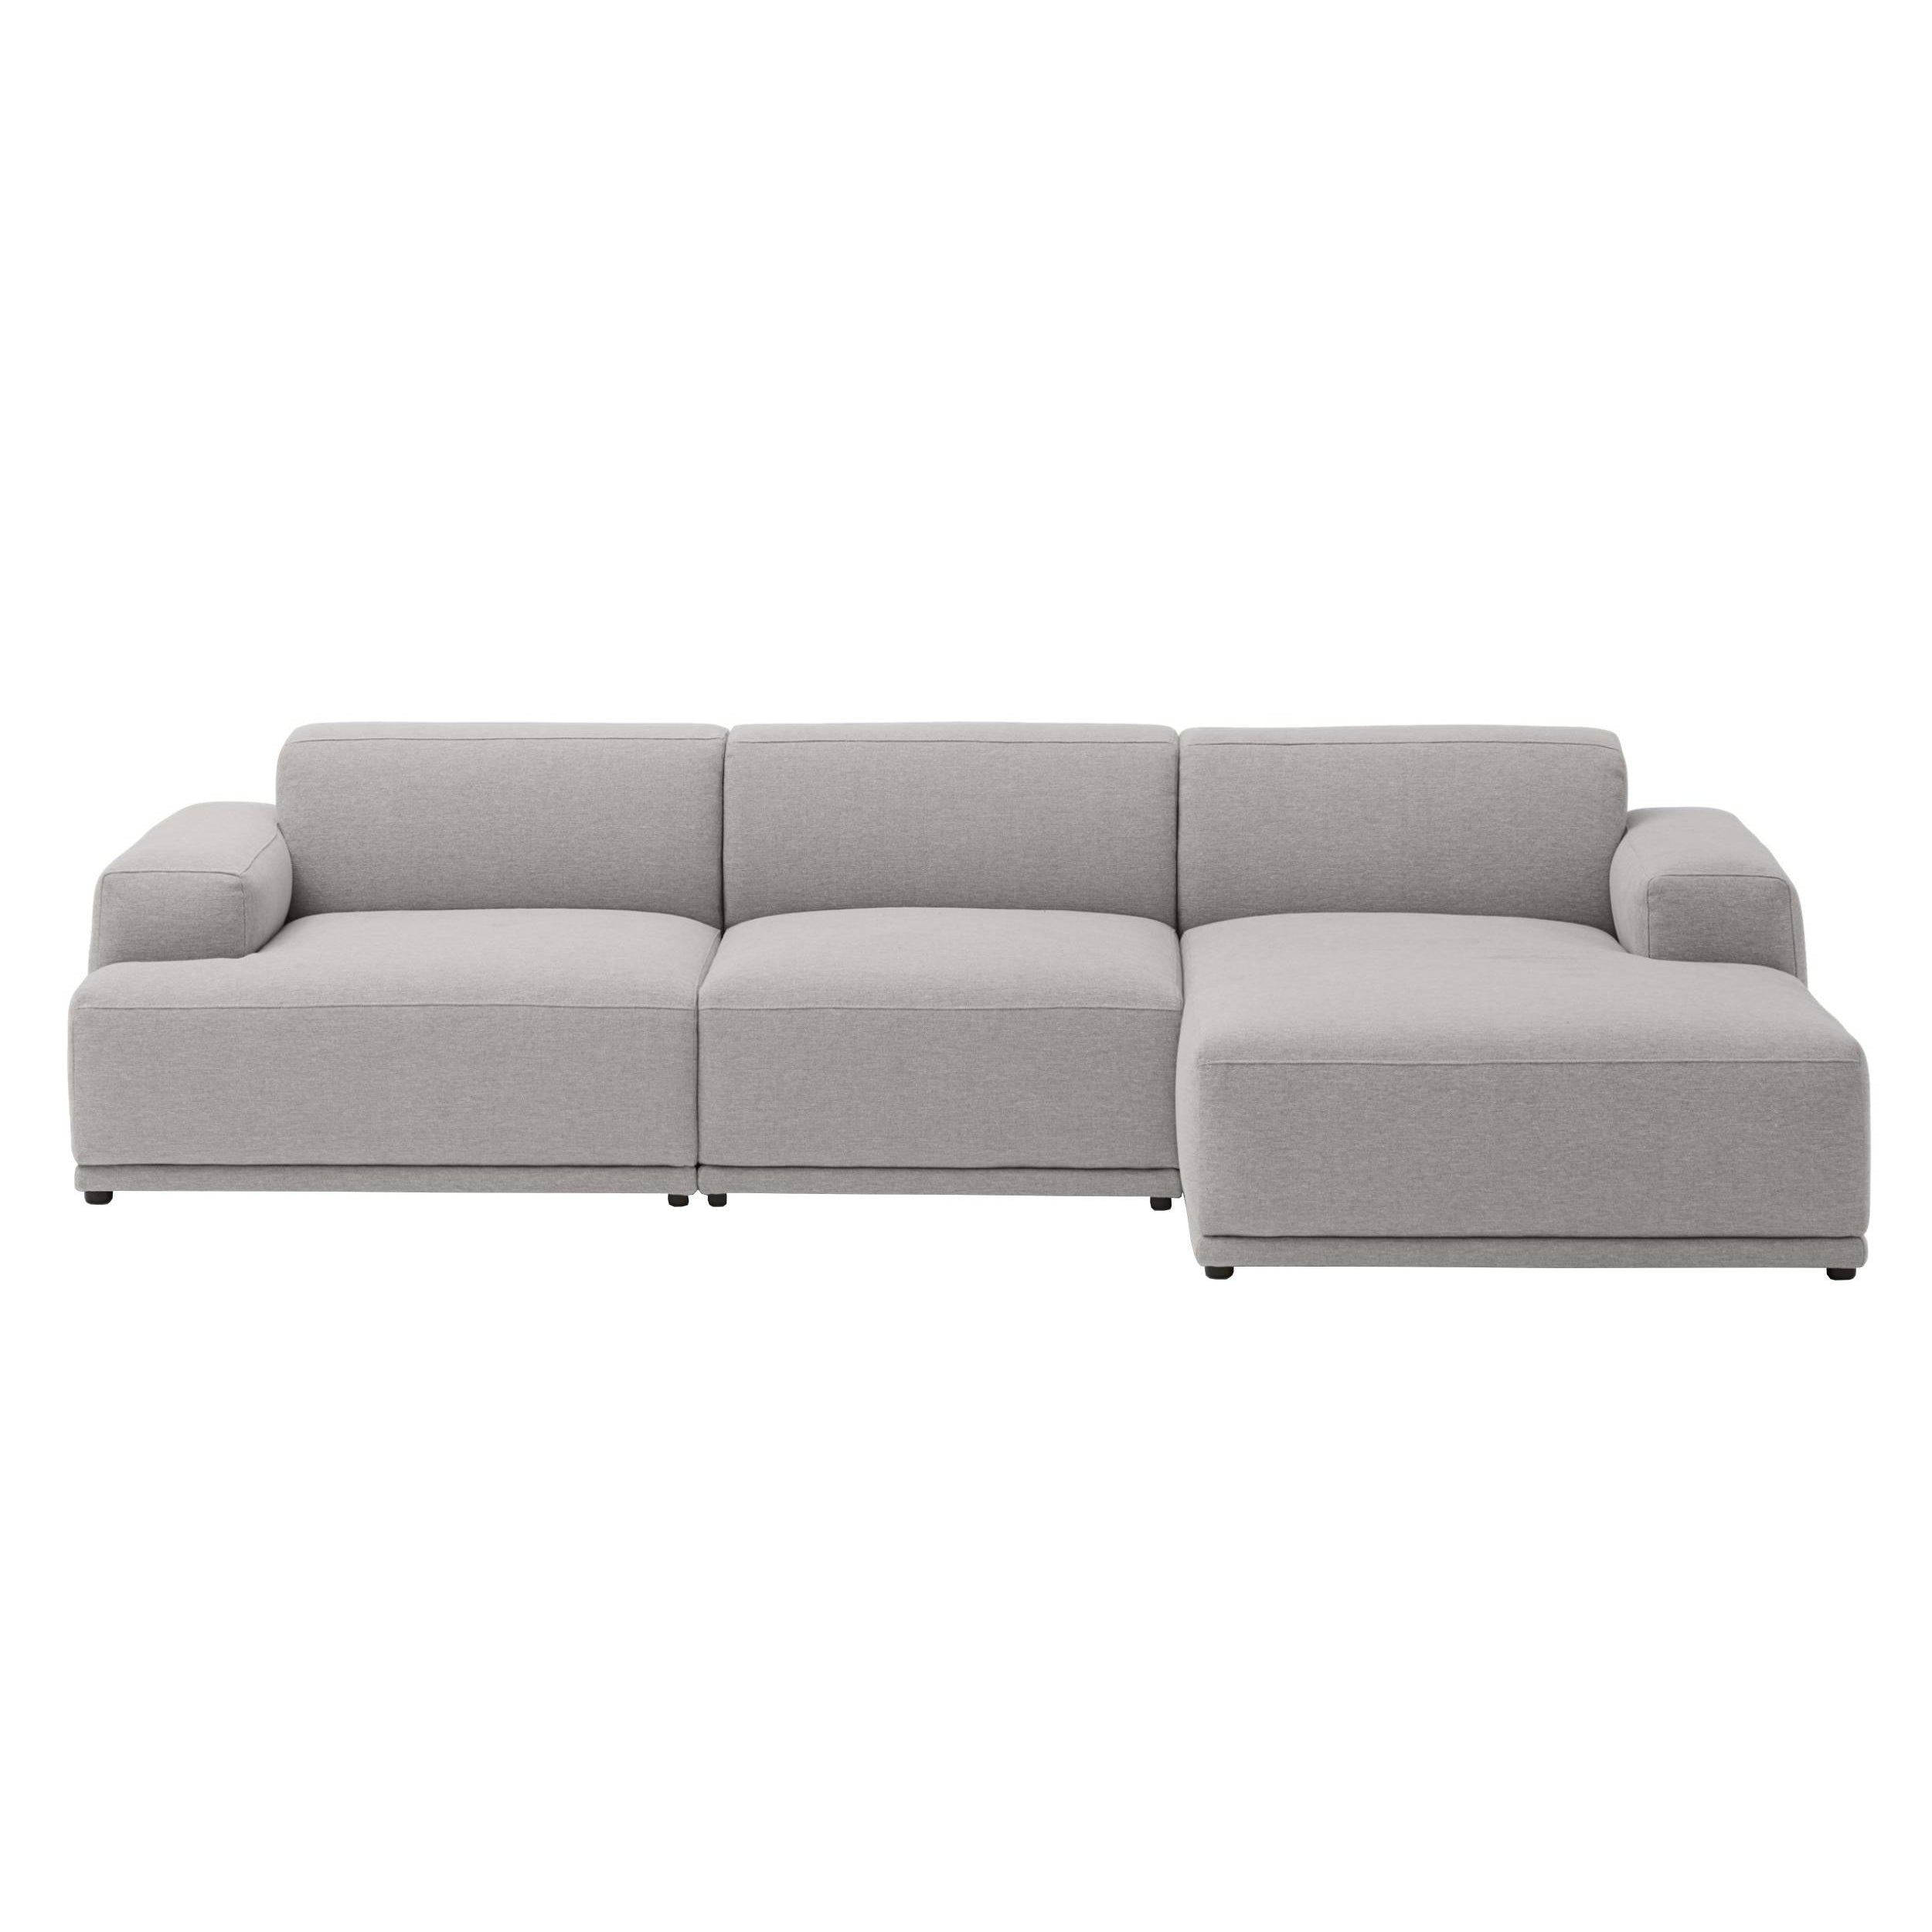 Connect Soft Modular Sofa: 3 Seater + Configuration 2 + Clay 12